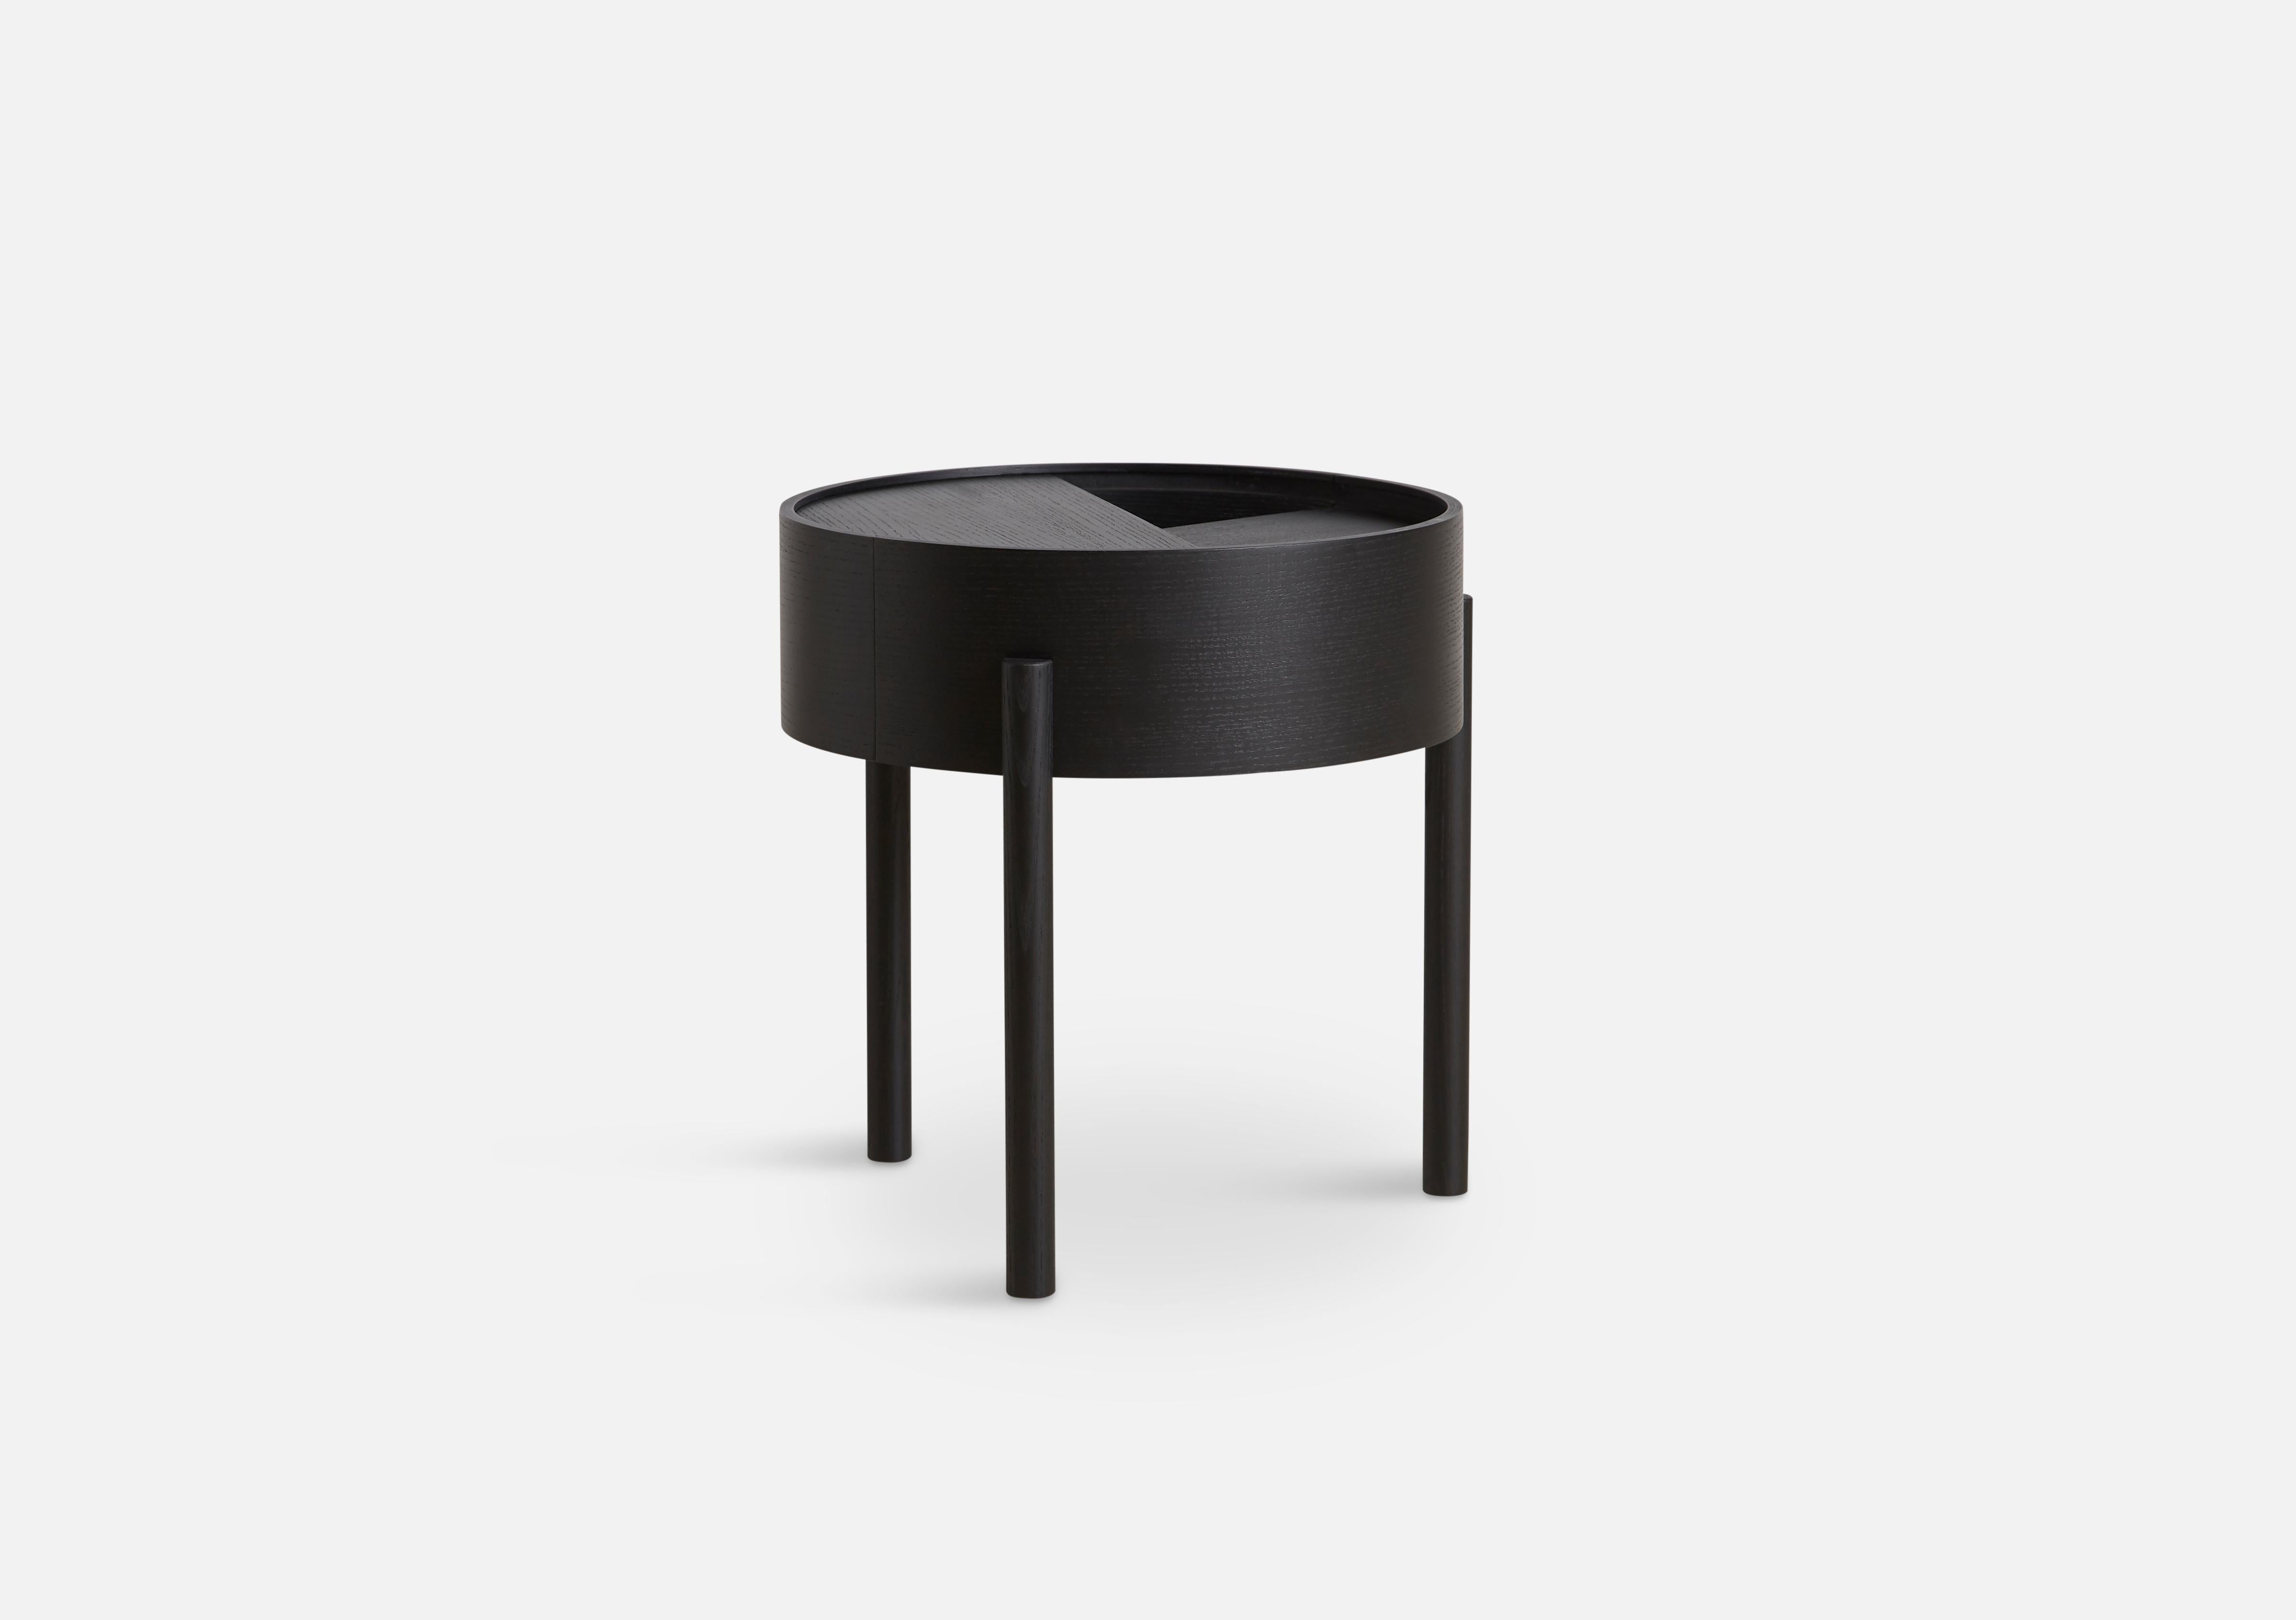 Black Ash Arc Side Table by Ditte Vad and Julie Bertrup
Materials: Ash, Nano Laminate
Dimensions: D 42 x W 42 x H 45 cm.
Also available in different sizes and materials: Ash, Oak, Walnut venner with solid Ash, Oak, Walnut legs. Please contact